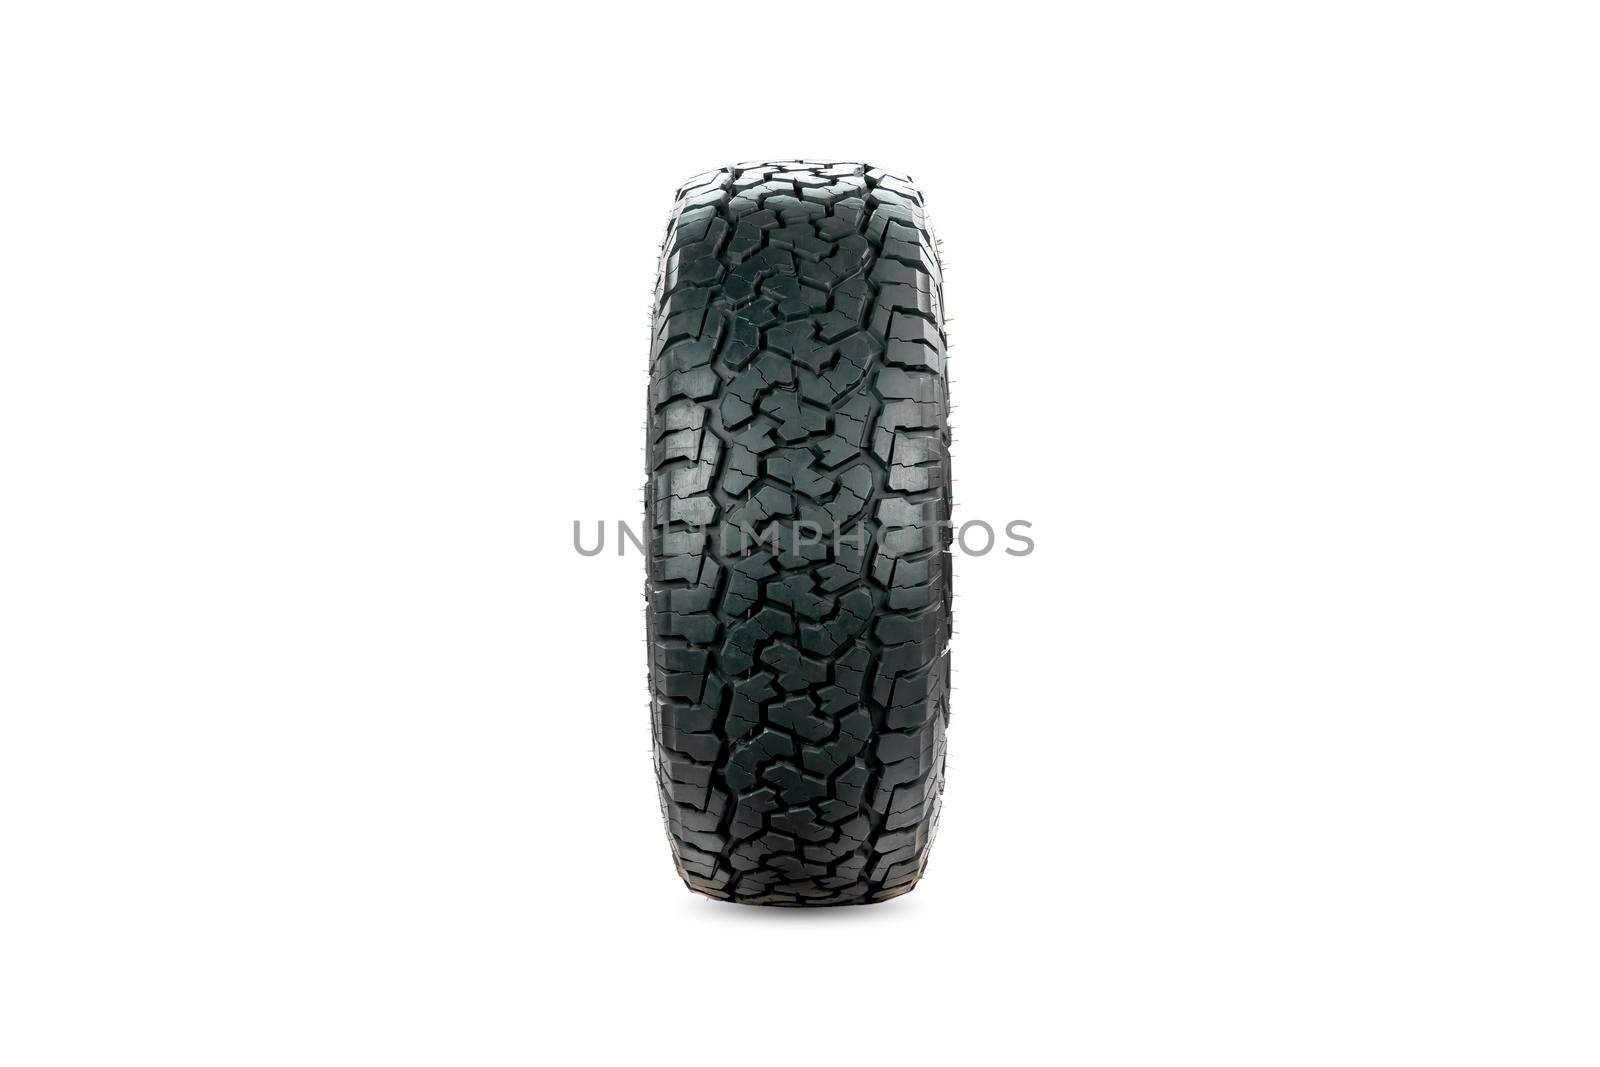 Front view of an all terrain tire designed for use in all road conditions isolated on white background.